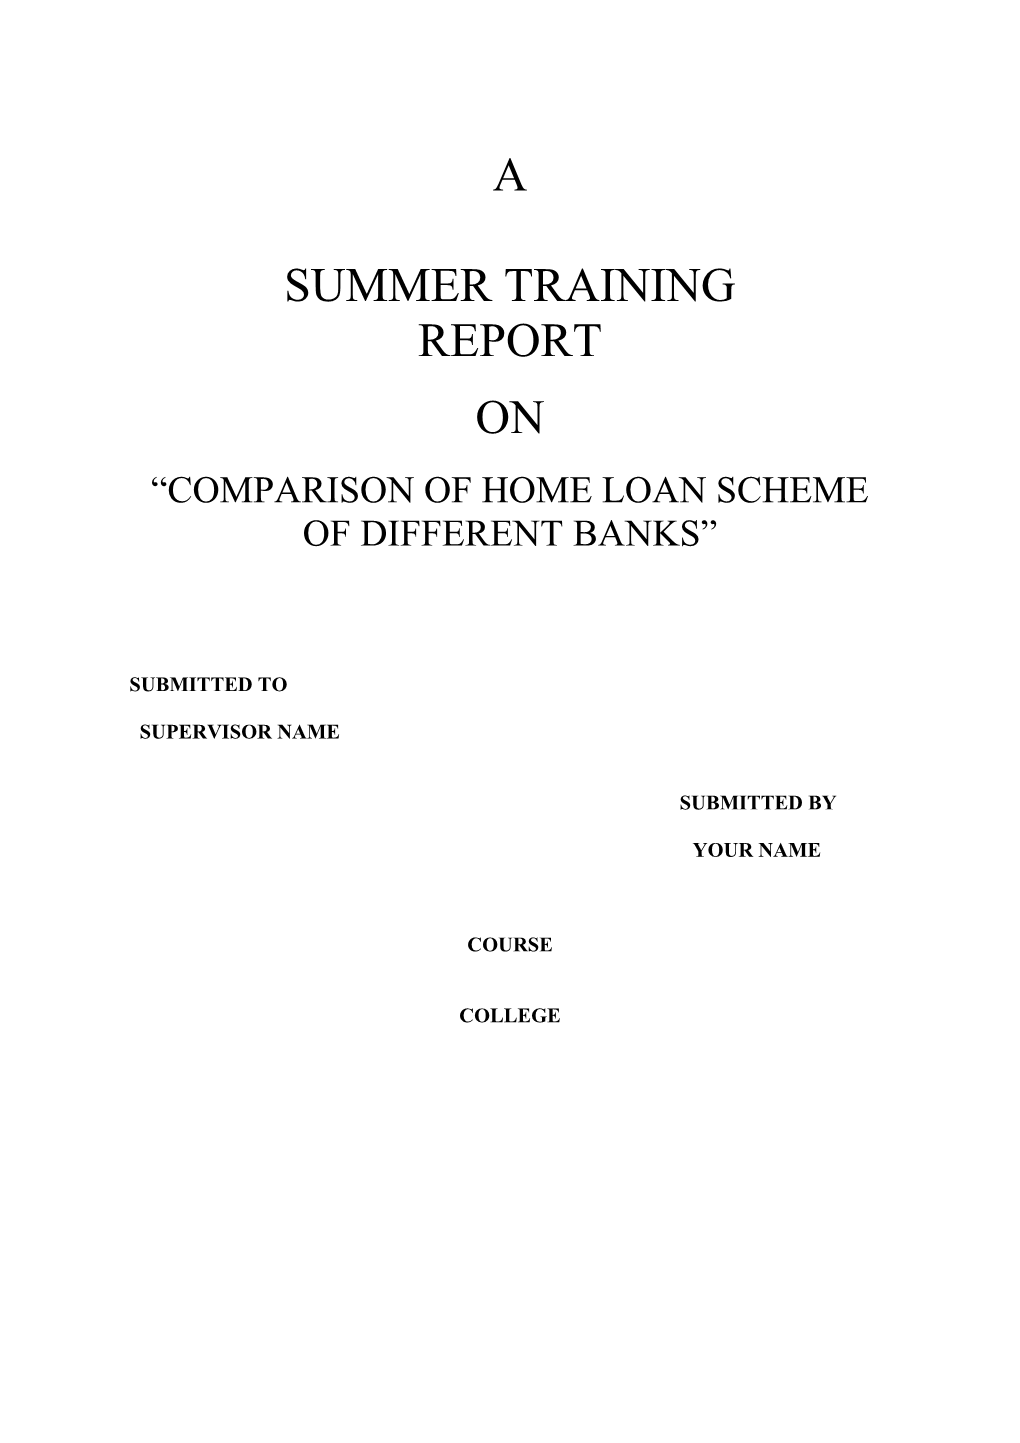 Comparison of Home Loan Scheme of Different Banks